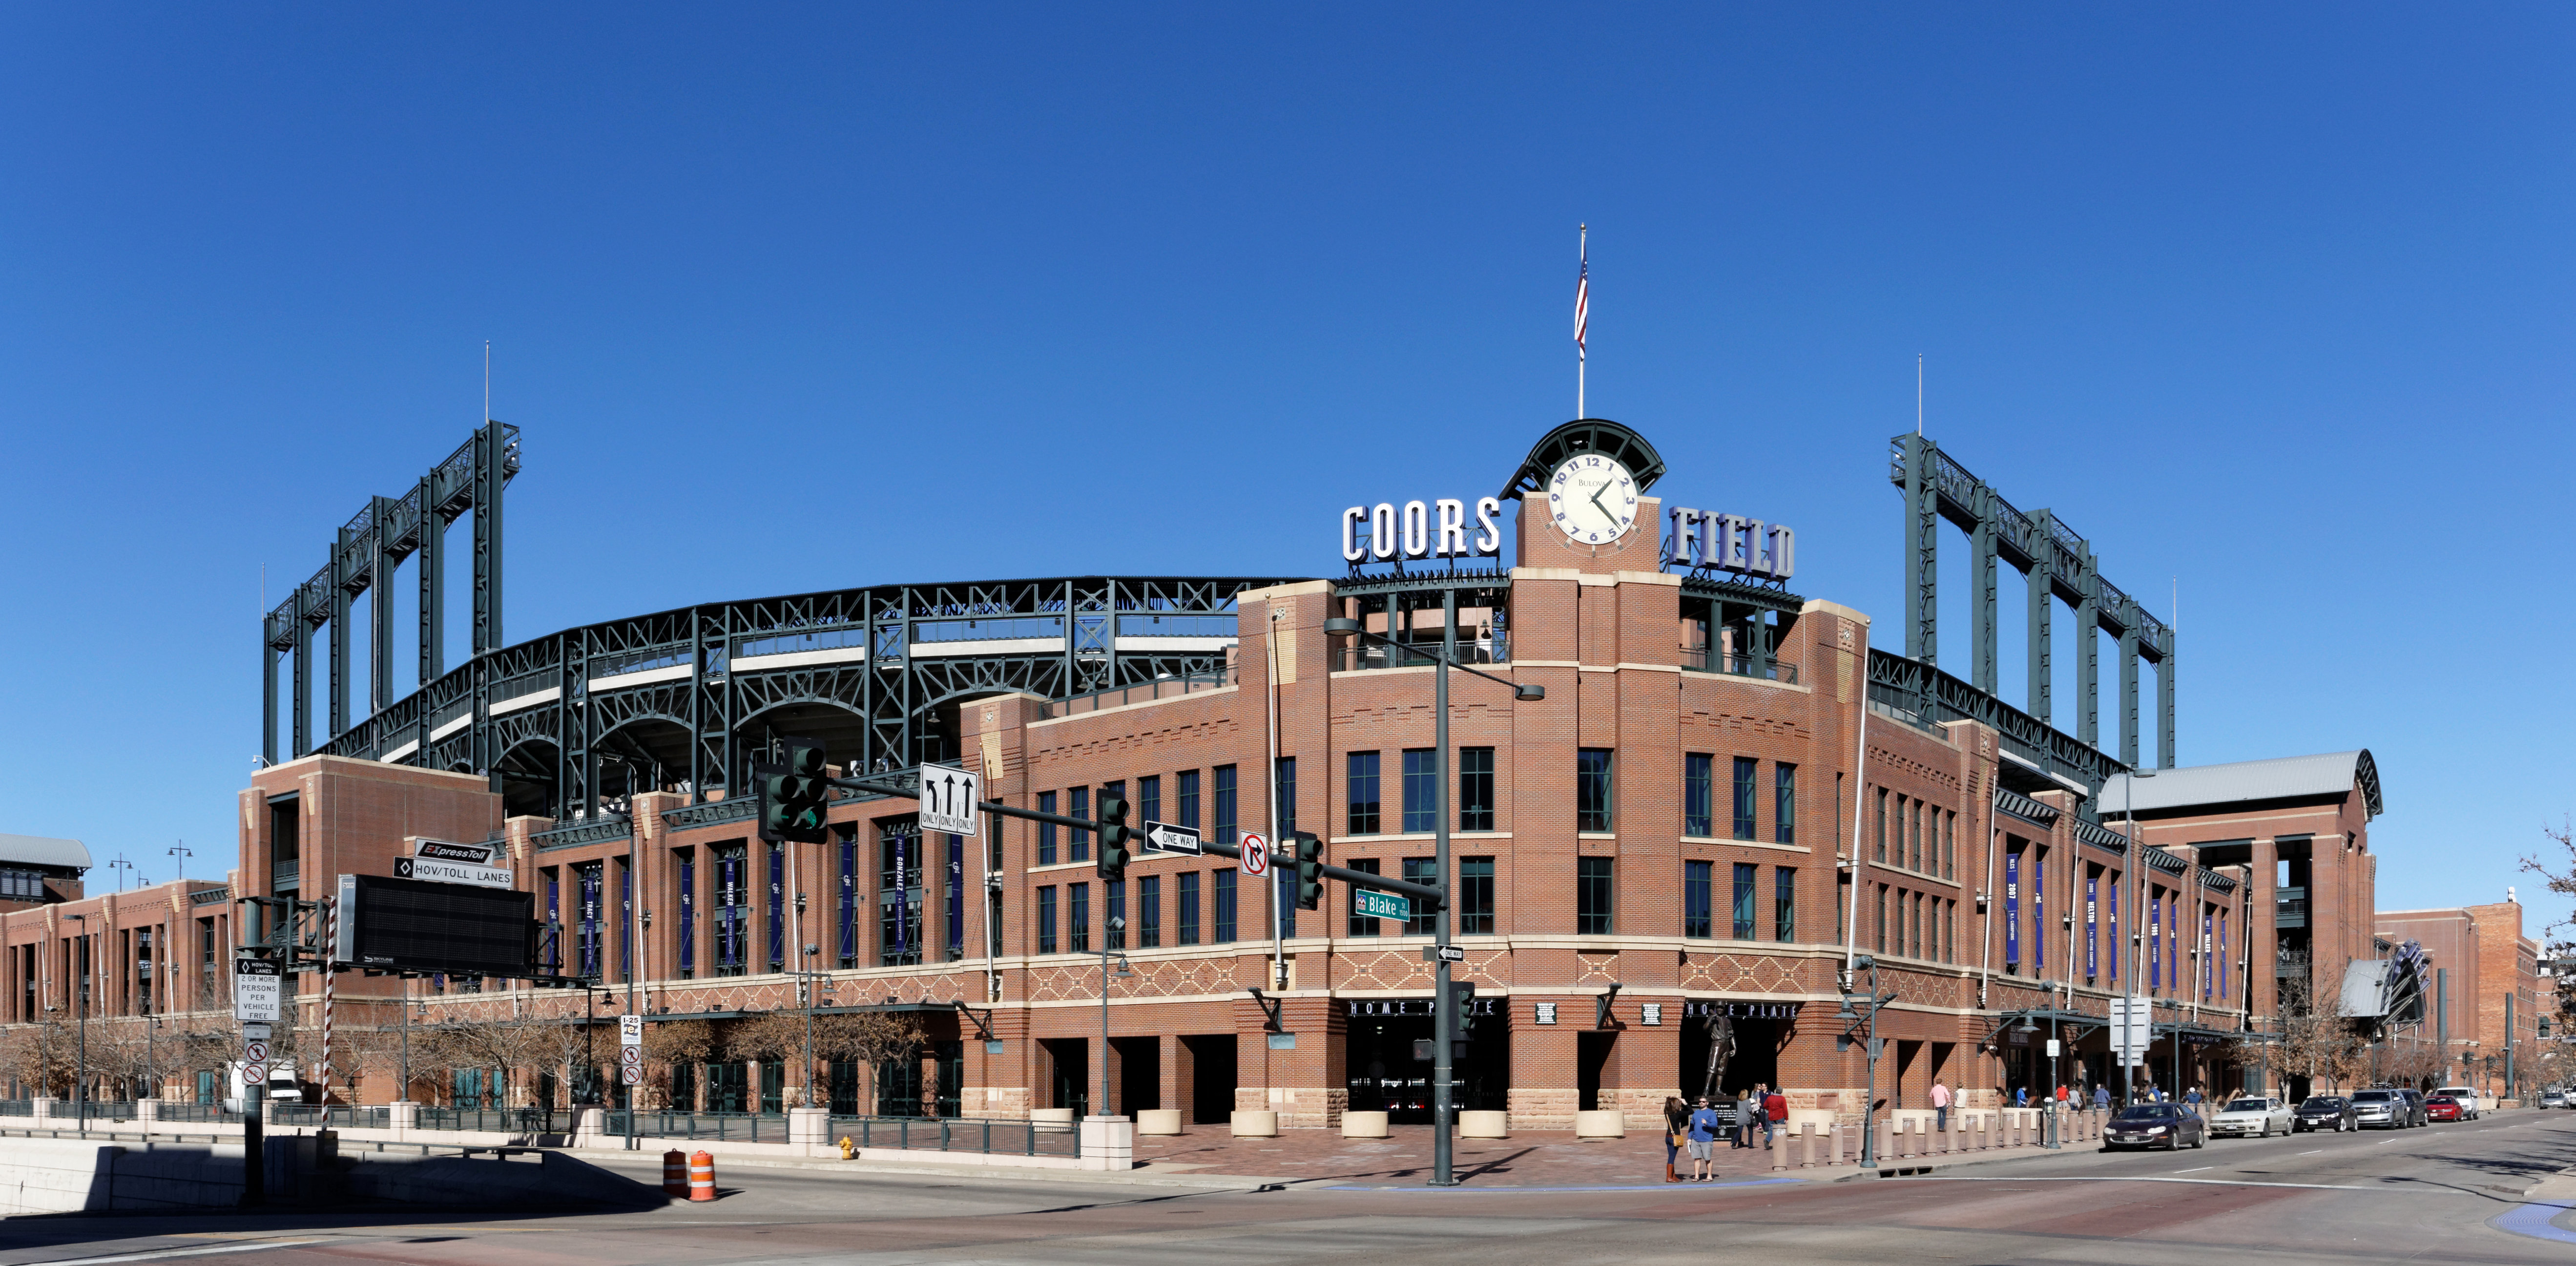 Coors Field- Home of the Rockies